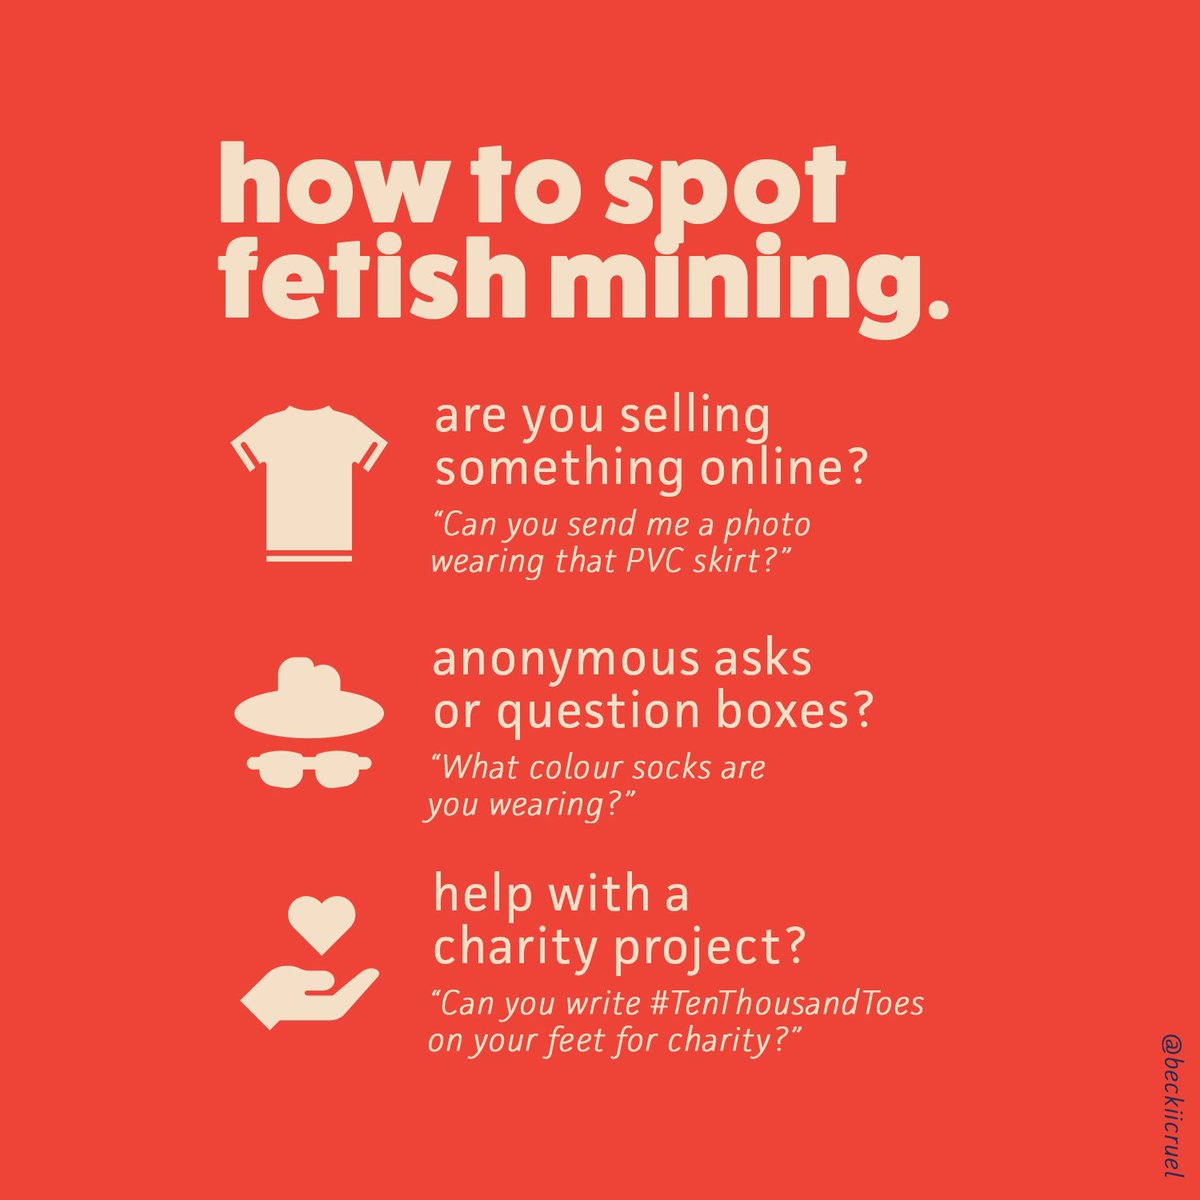  #fetishmining: A really common and uncomfortable phenomenon that many people online are solicited to participate in, without their knowledge or consent. What is Fetish Mining?THREAD>>